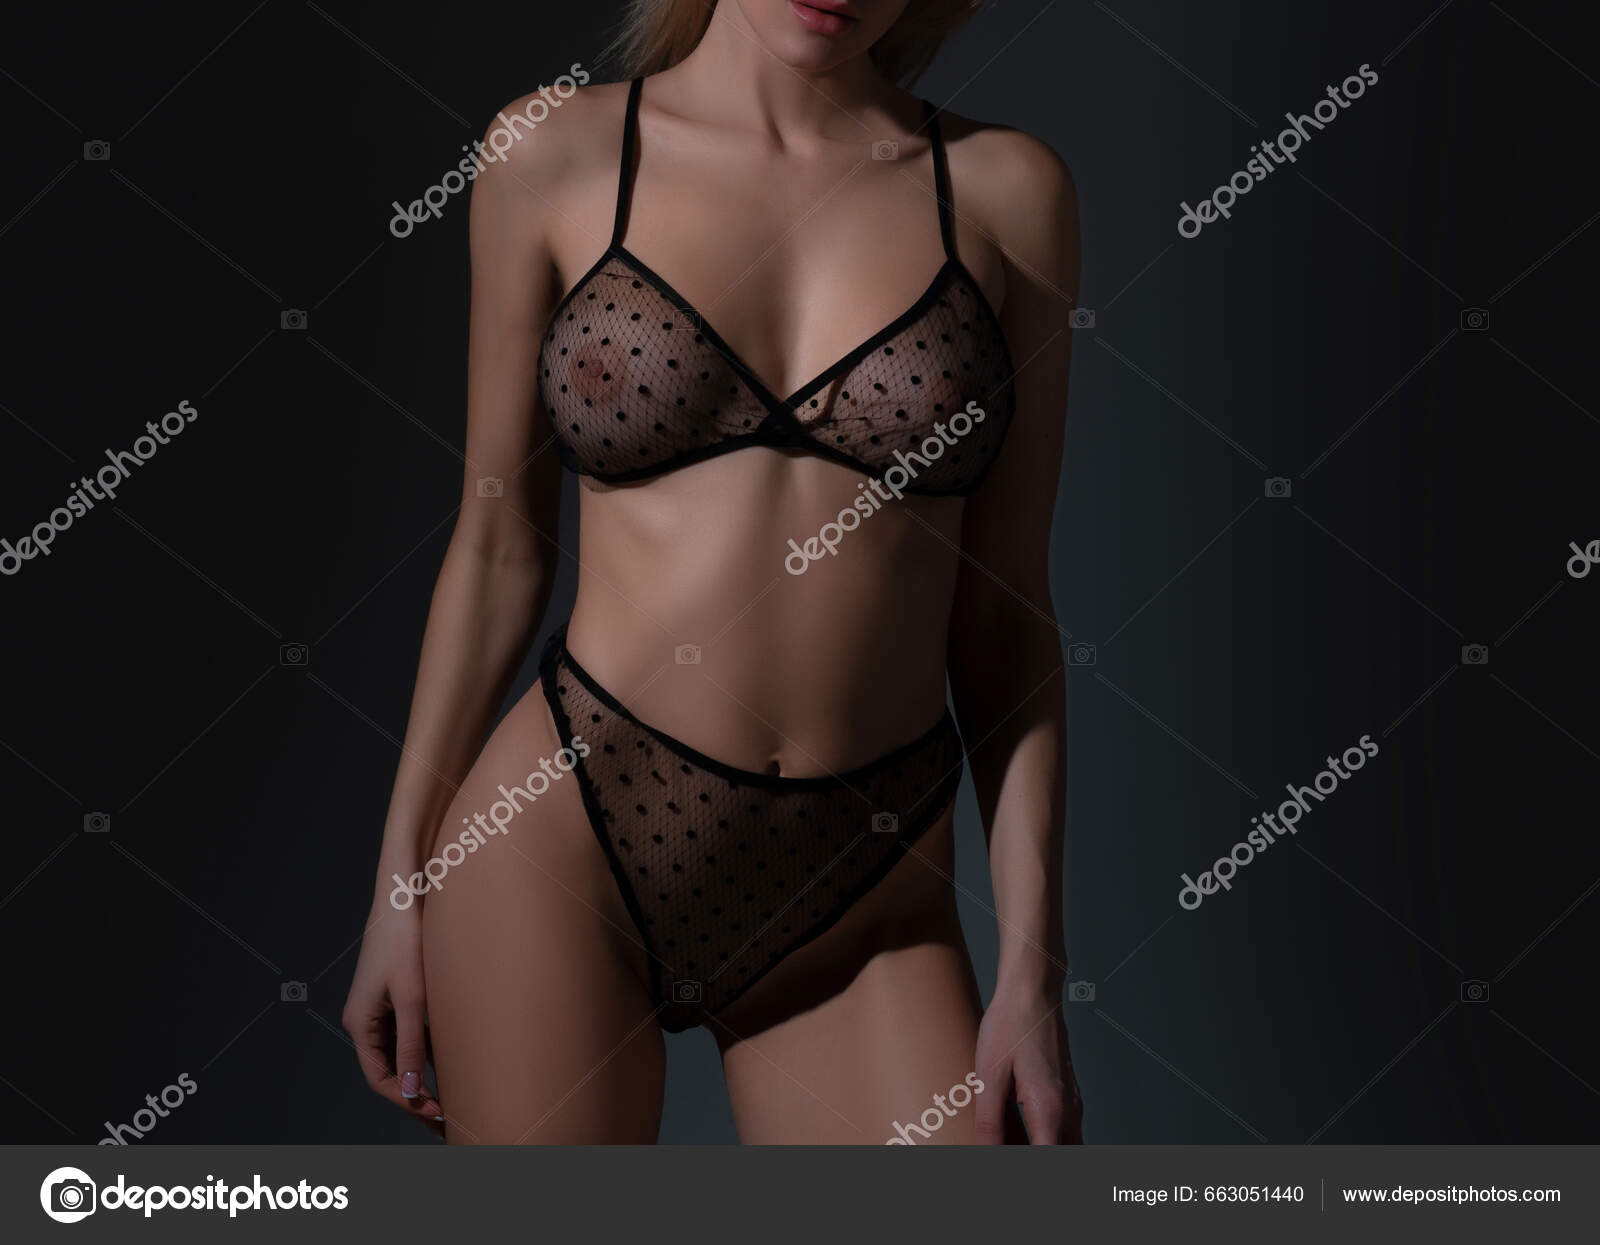 Sexy Transparent Lingerie Women Large Breasts Sexy Breas Boobs Bra